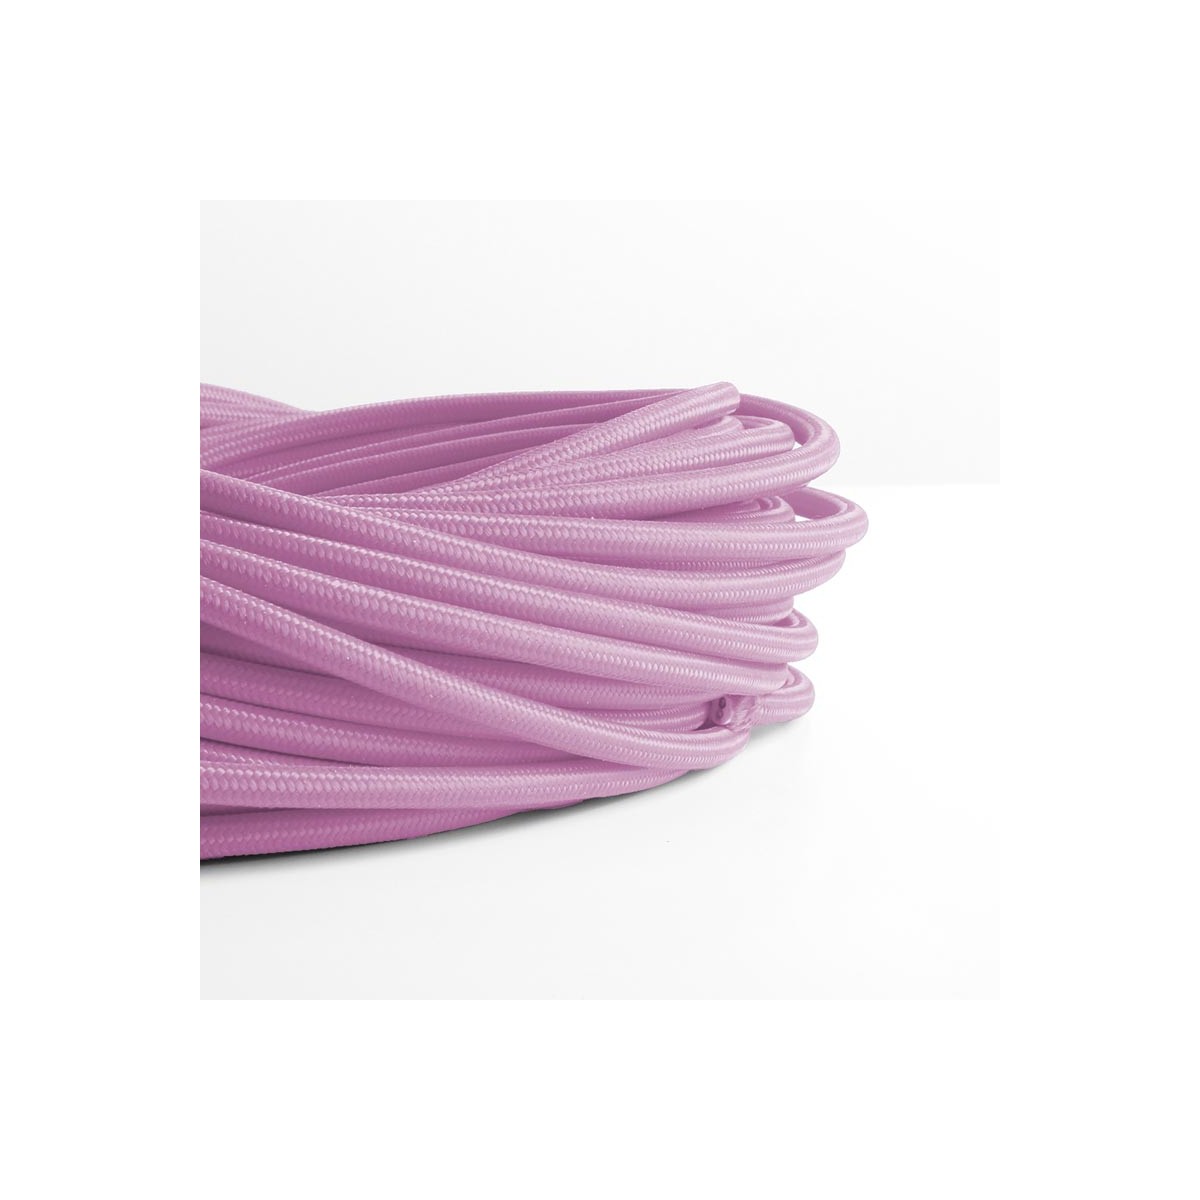 Electric cable coated with pink cotton